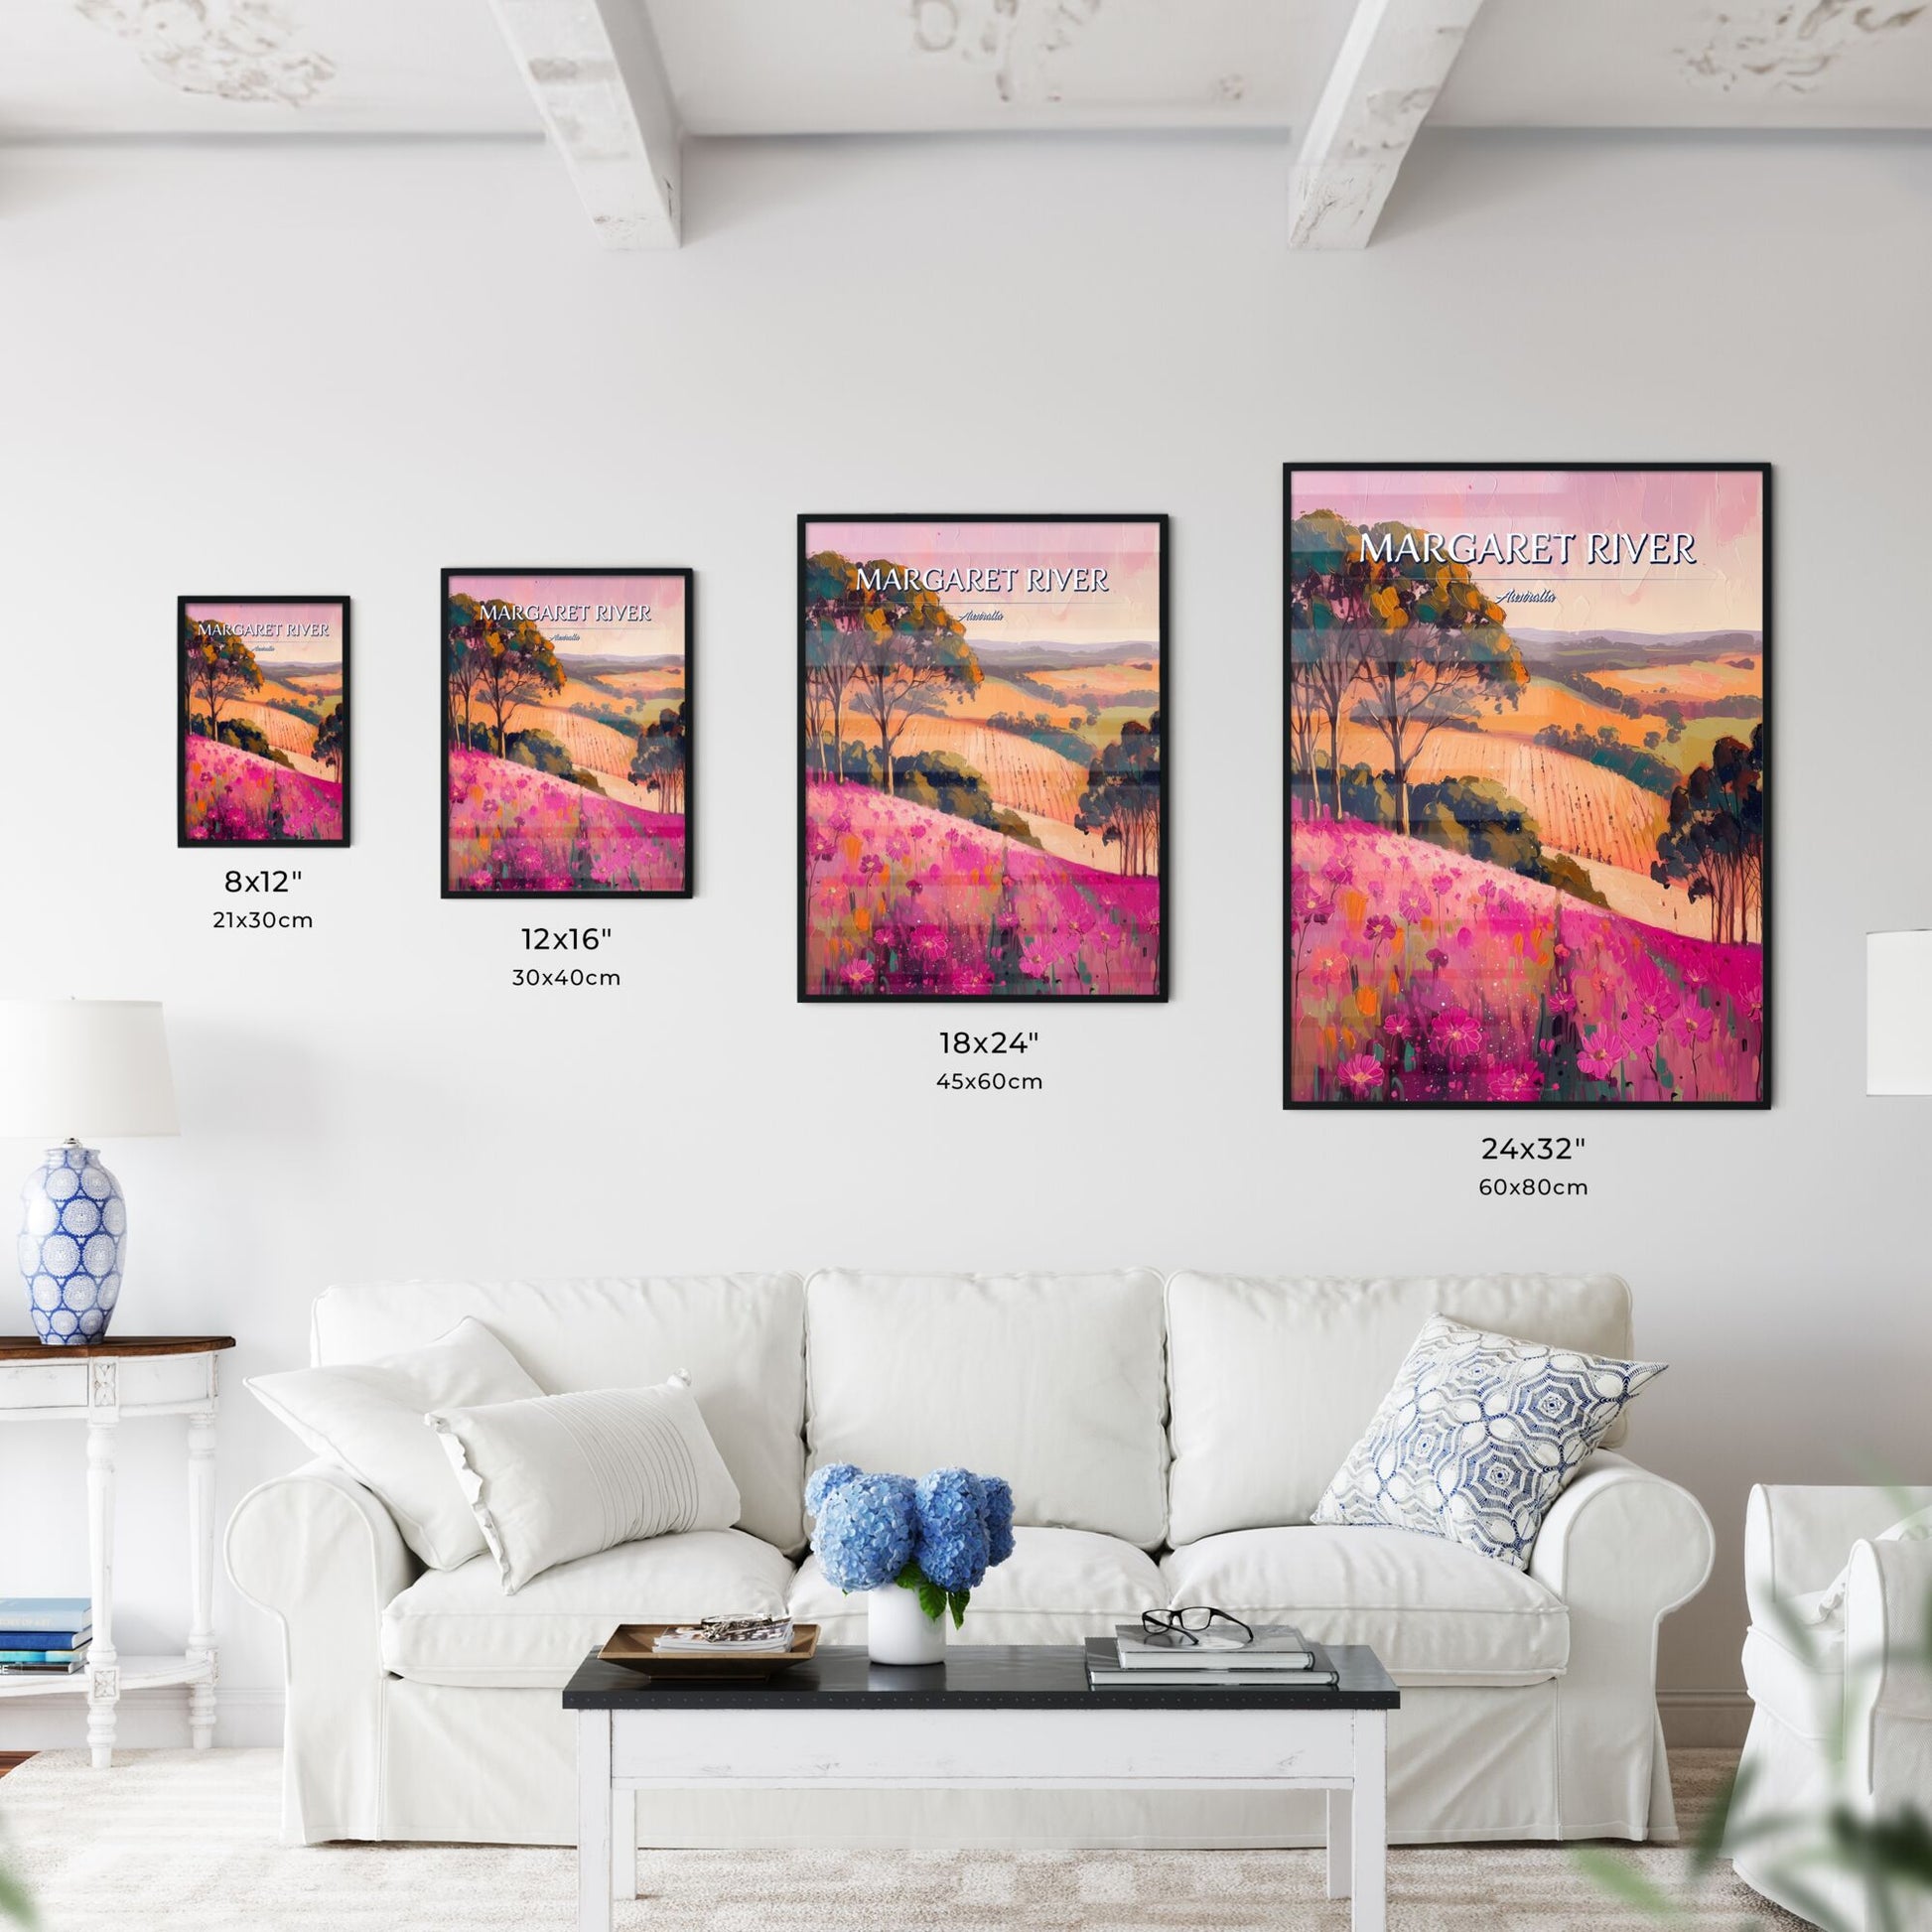 Margaret River, Australia - Art print of a painting of a field of flowers Default Title